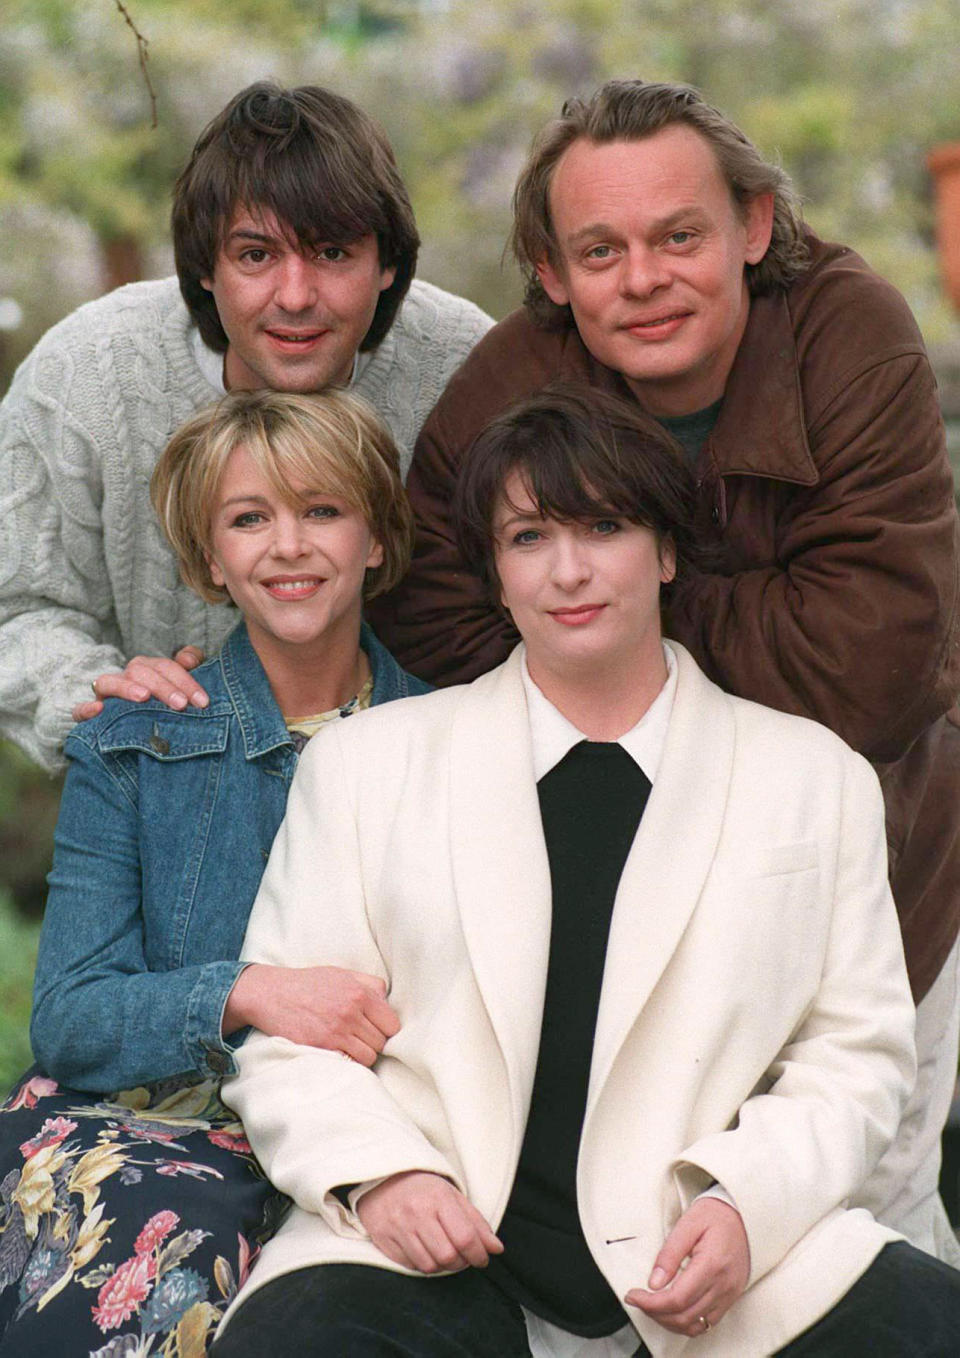 Stars of the BBC-1 series Men Behaving Badly ; Martin Clunes (top r) and Neil Morrissey, Leslie Ash (bottom left) and Caroline Quentin.   * 22/5/96 Caroline Quentin suing her agent. 27/8/96 The show, which  won the 1995 winner of Best Comedy in the National Television Awards (The Viewers Choice), has been nominated for the same  award again this year.   (Photo by Rebecca Naden - PA Images/PA Images via Getty Images)